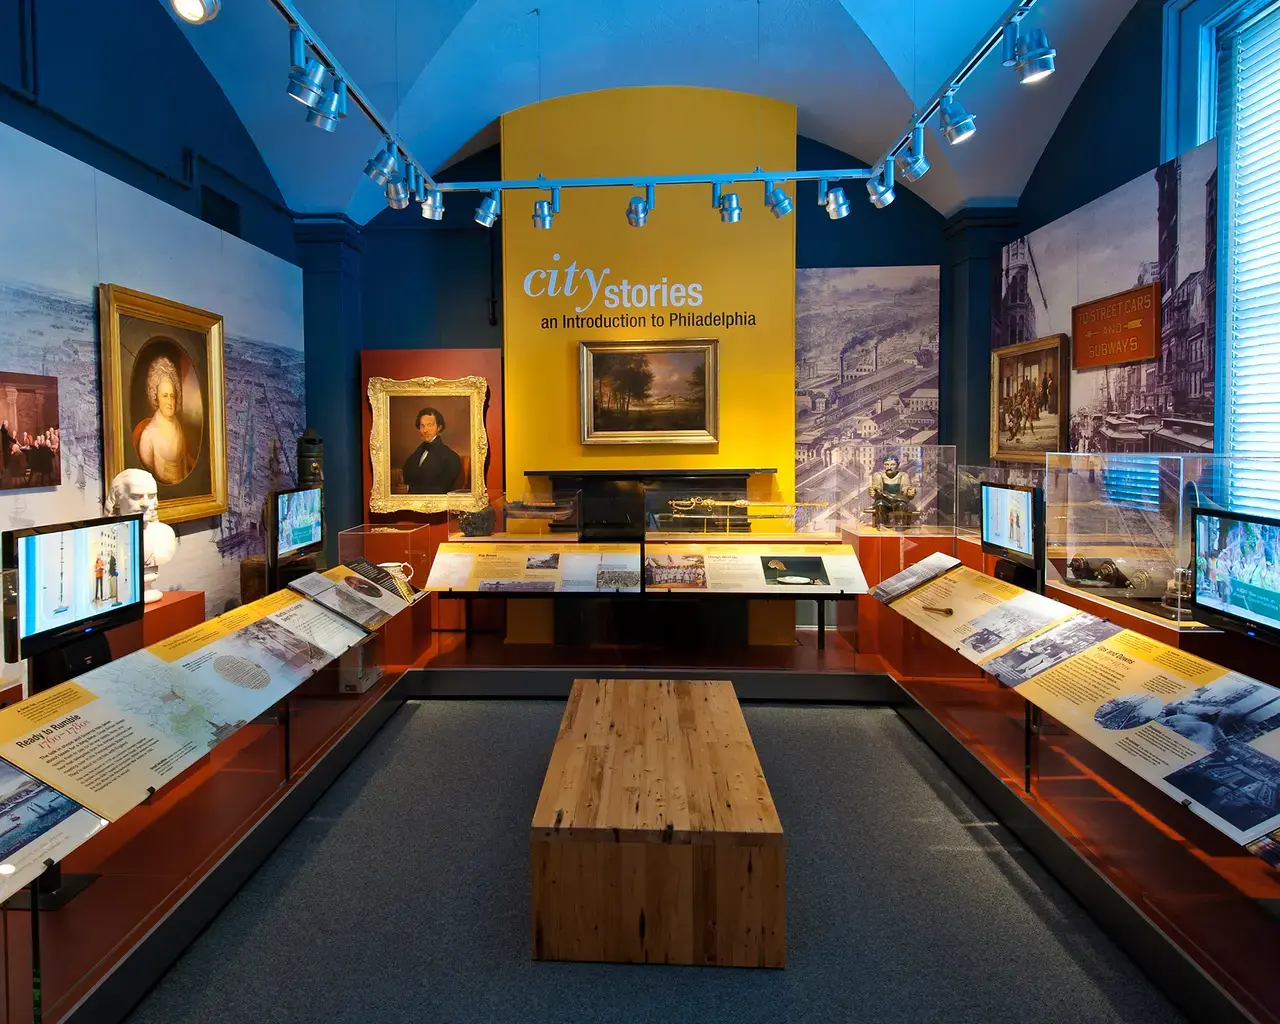 Atwater Kent Collection material on display at the Philadelphia History Museum, c. 2018. Drexel University’s Reshaping Historical Narratives through the Atwater Kent Collection presents overlooked artifacts and narratives from the collection. Photo courtesy of Drexel University.